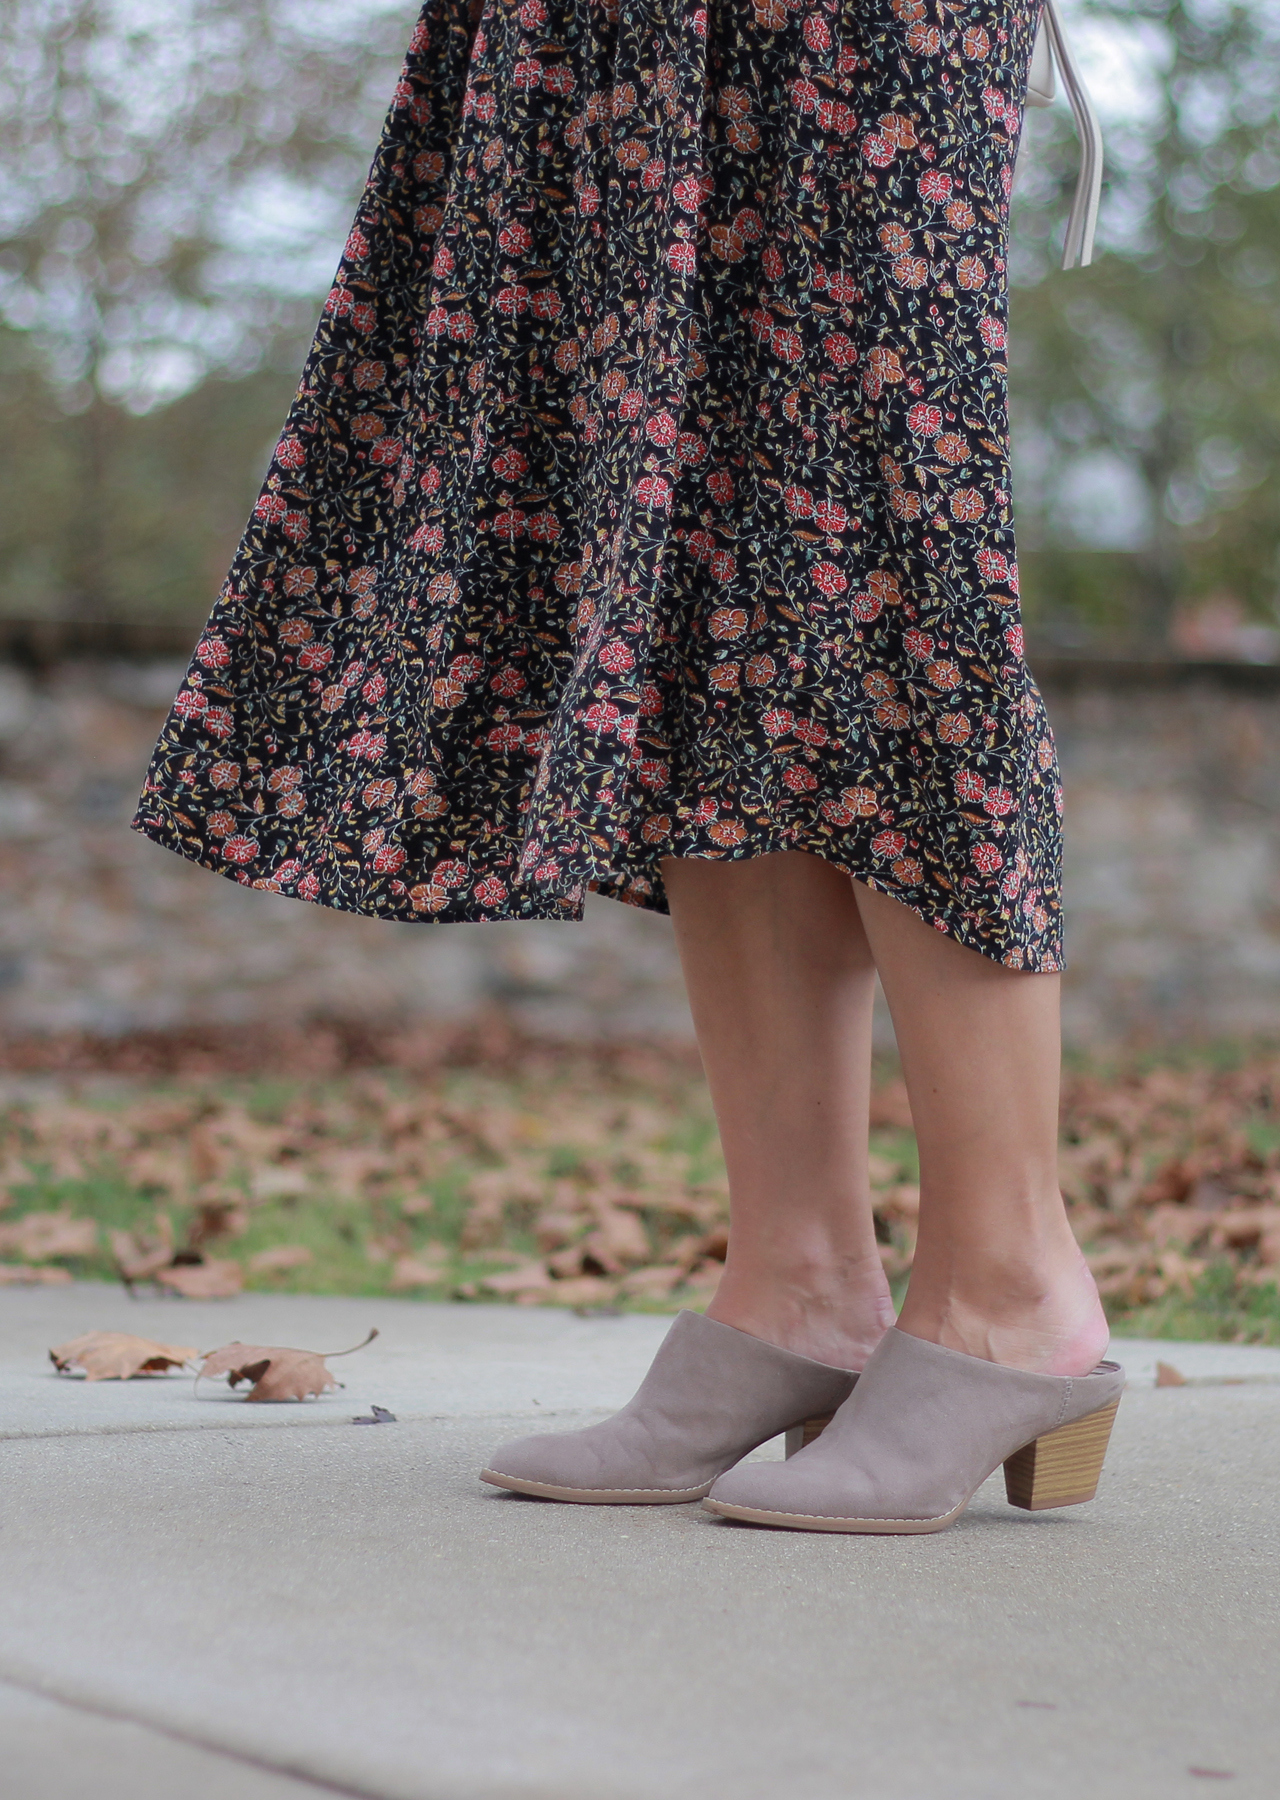 The Steele Maiden: Fall Floral Maxi with Old Navy